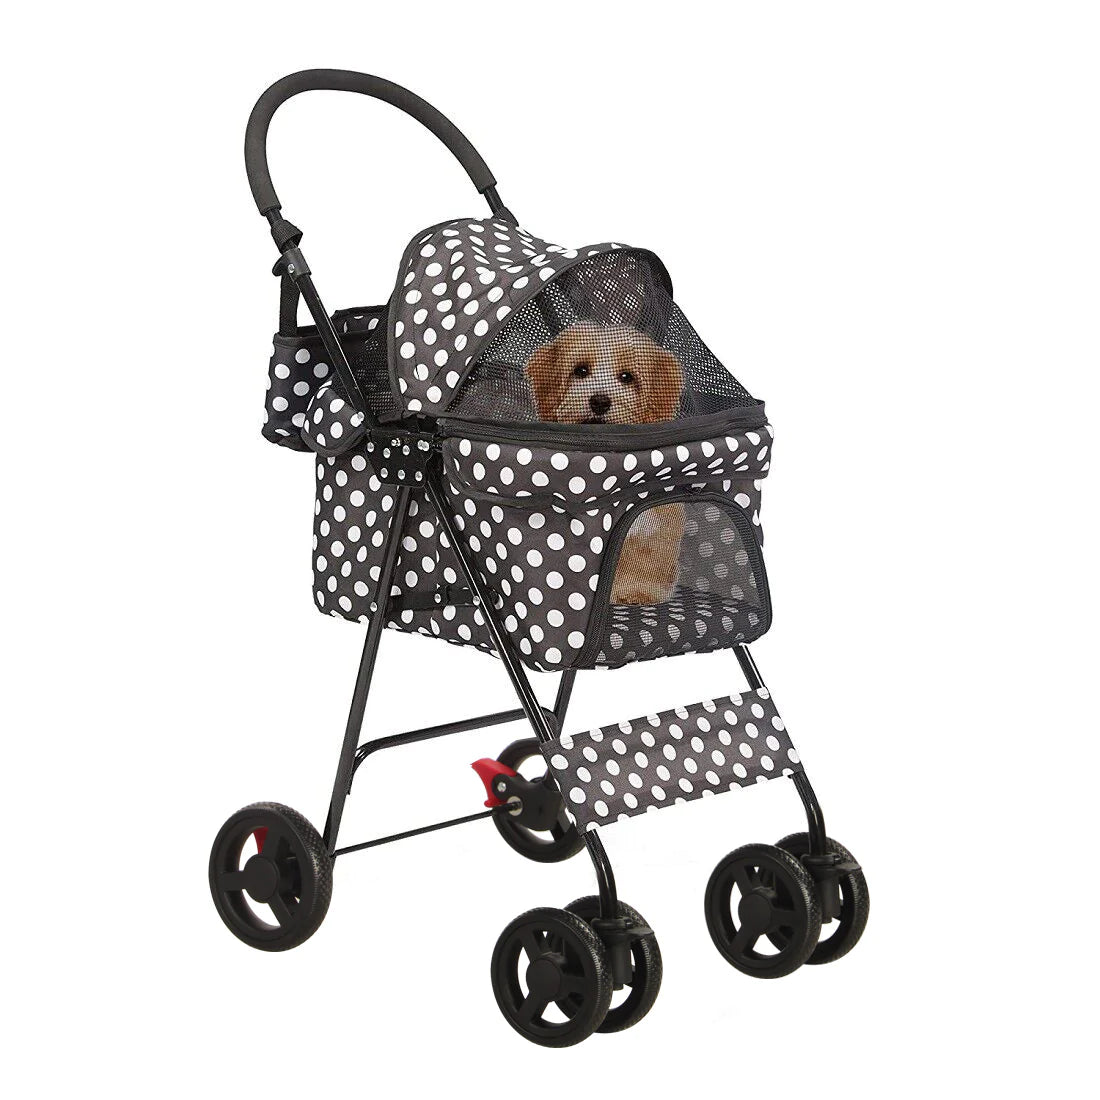 Folding Dog Stroller Travel Cage Stroller for Pet Cat Kitten Puppy Carriages